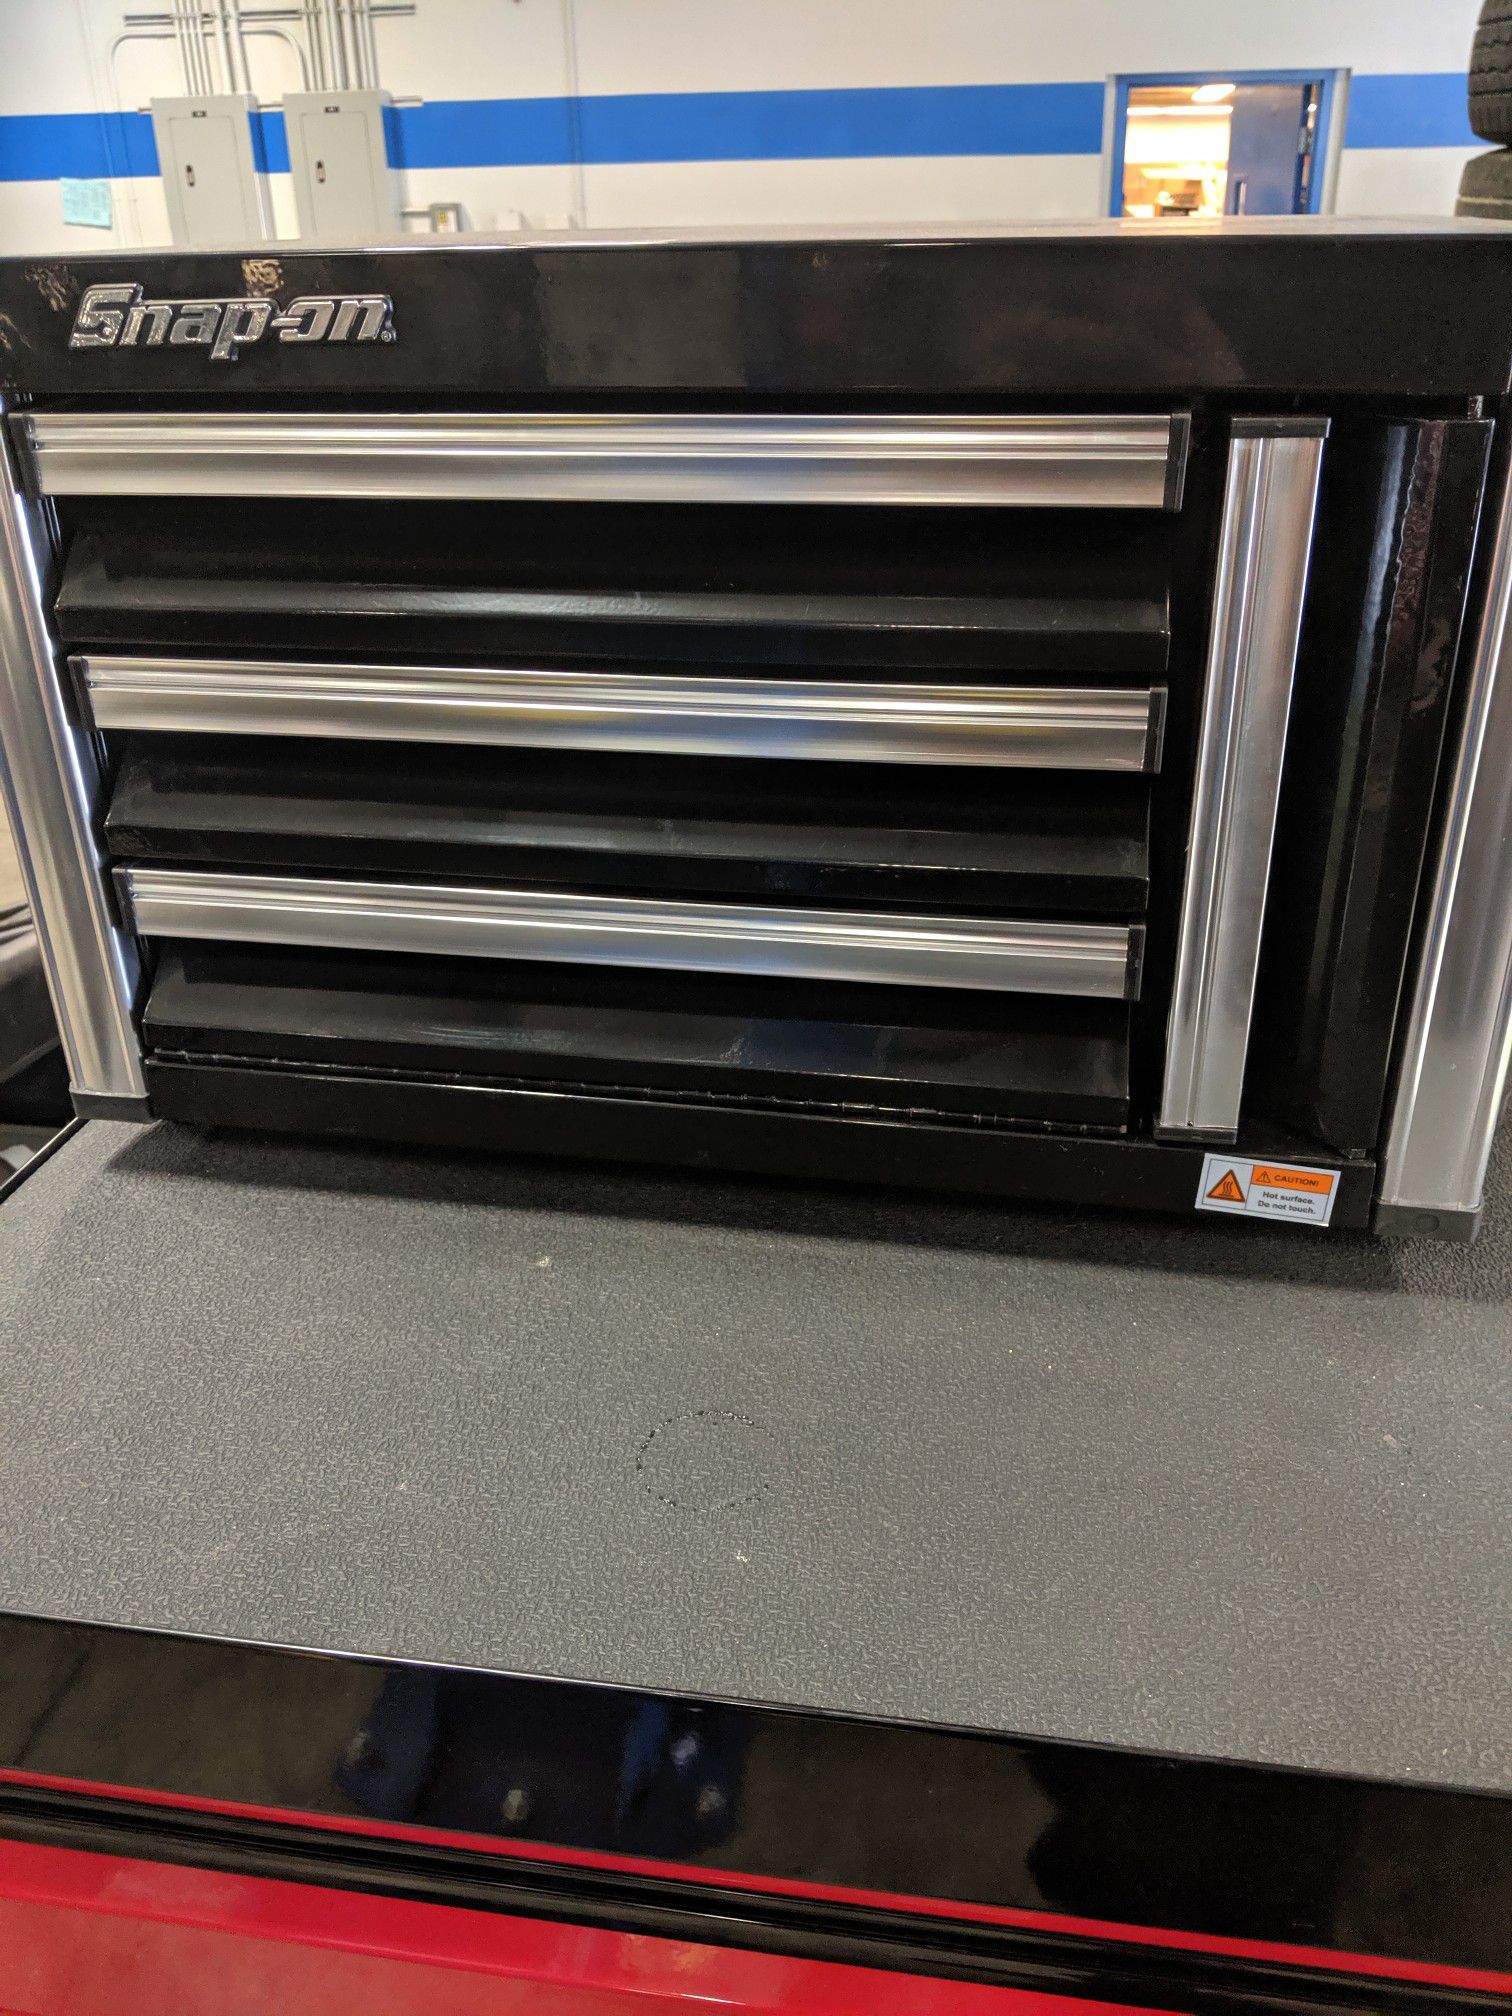 Snap on pizza oven